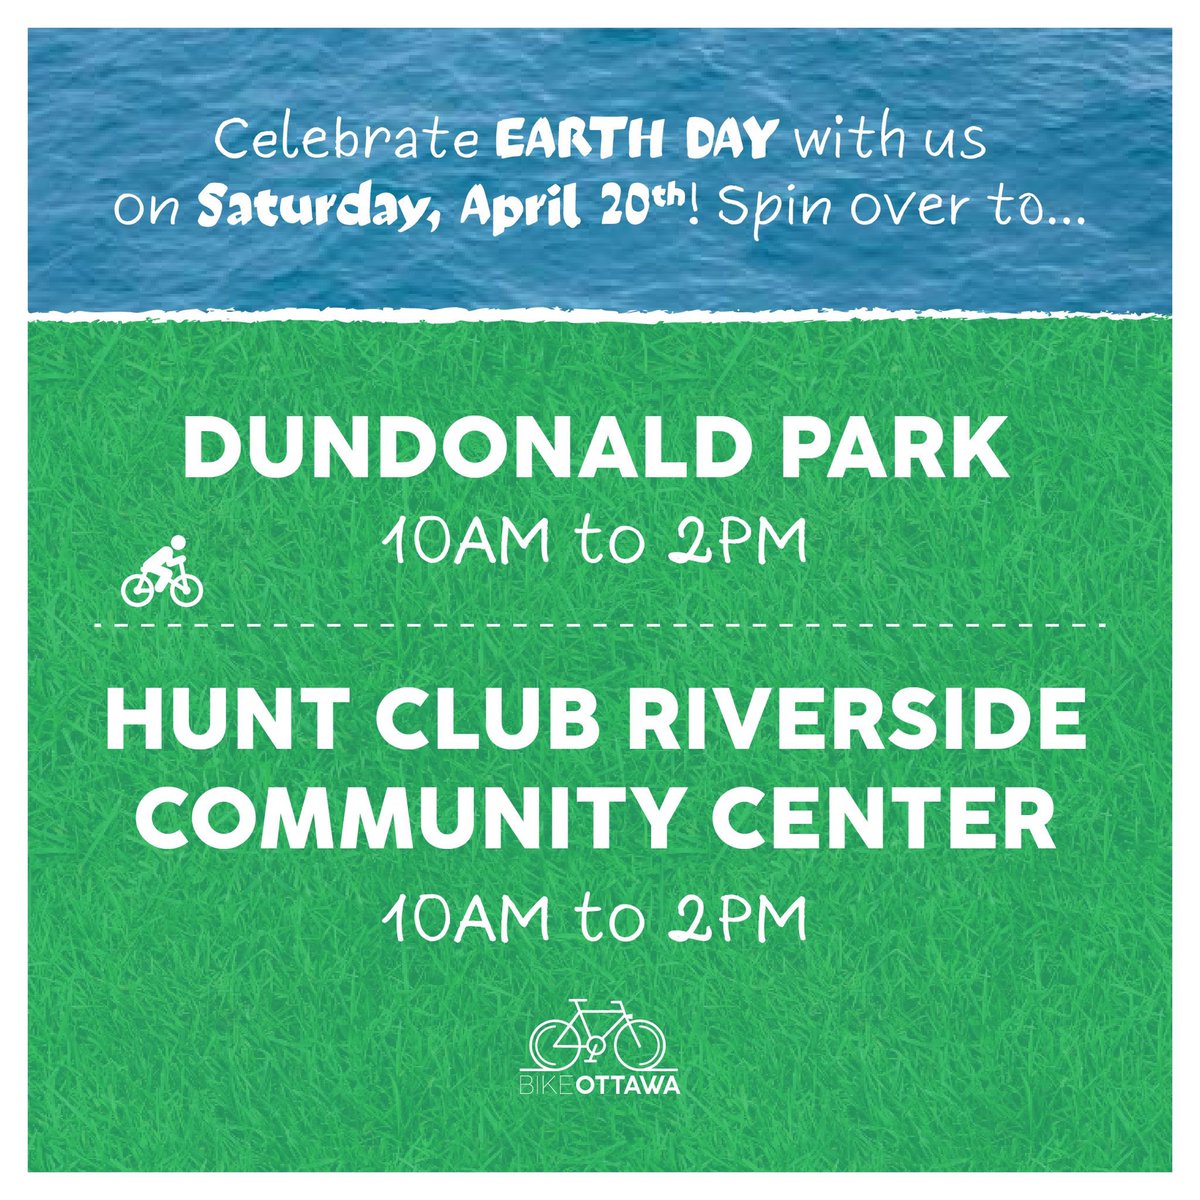 Excited to take part in Earth Day celebrations alongside amazing organizations who are working towards making Ottawa a healthier city. 
@EcologyOttawa @ForourkidsO @OSEAN_Ottawa 

Come chat with us!

10-2 Dundonald
10-1 Hunt Club Riverside CC
 #ottbike #ottroll #ottwalk #ottcity